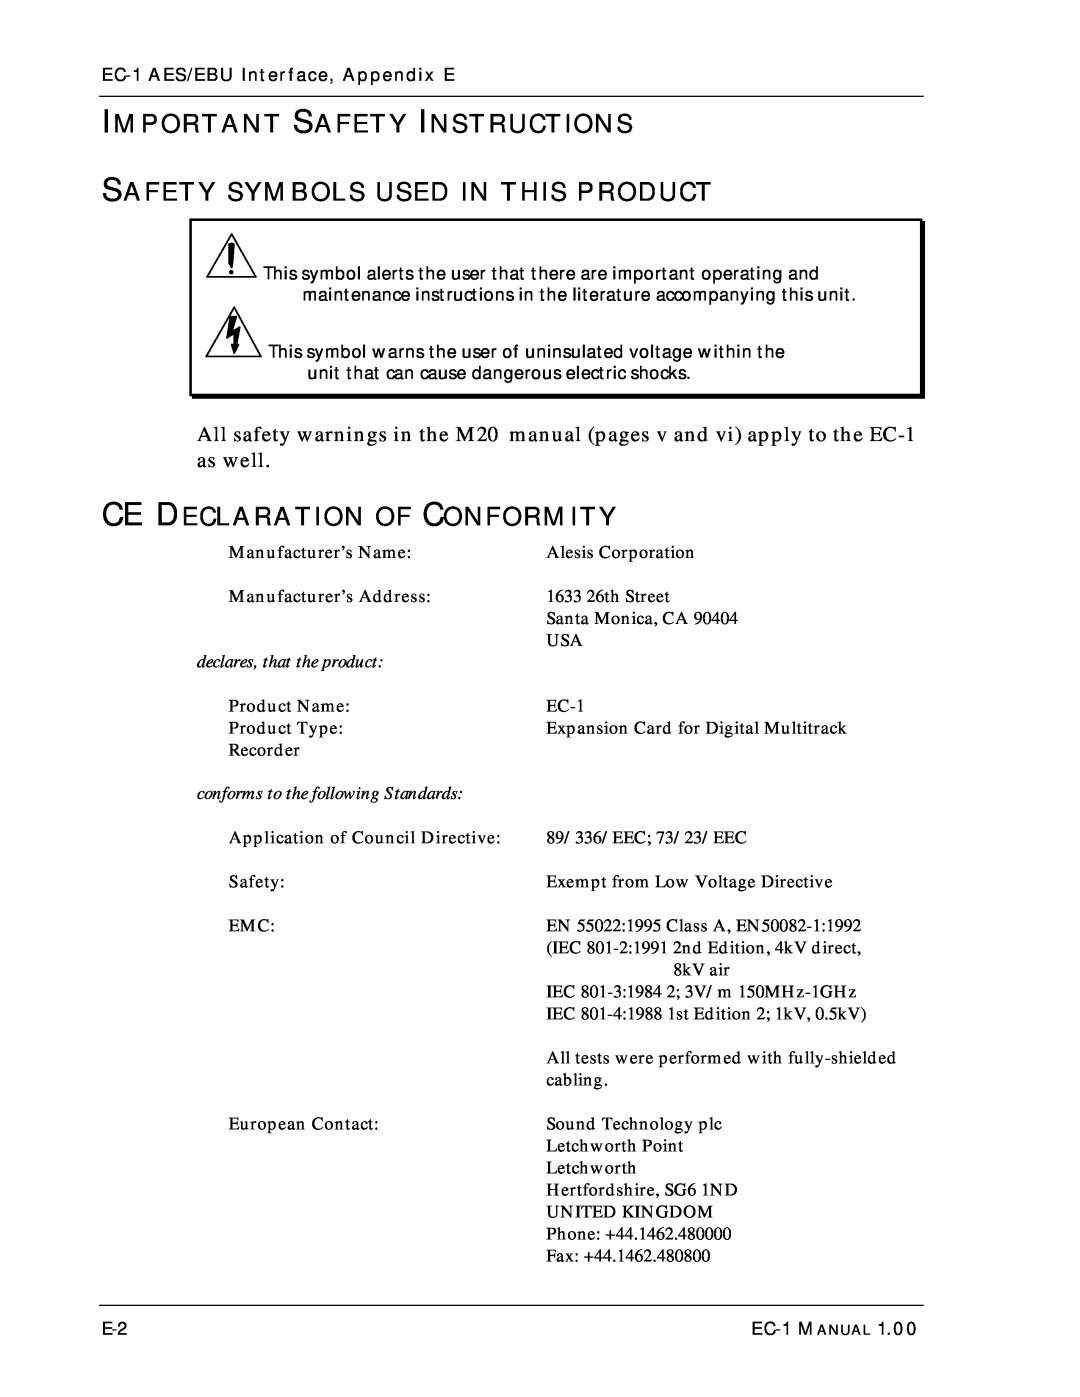 Alesis EC-1 A ES/EBU Important Safety Instructions Safety Symbols Used In This Product, Ce Declaration Of Conformity 